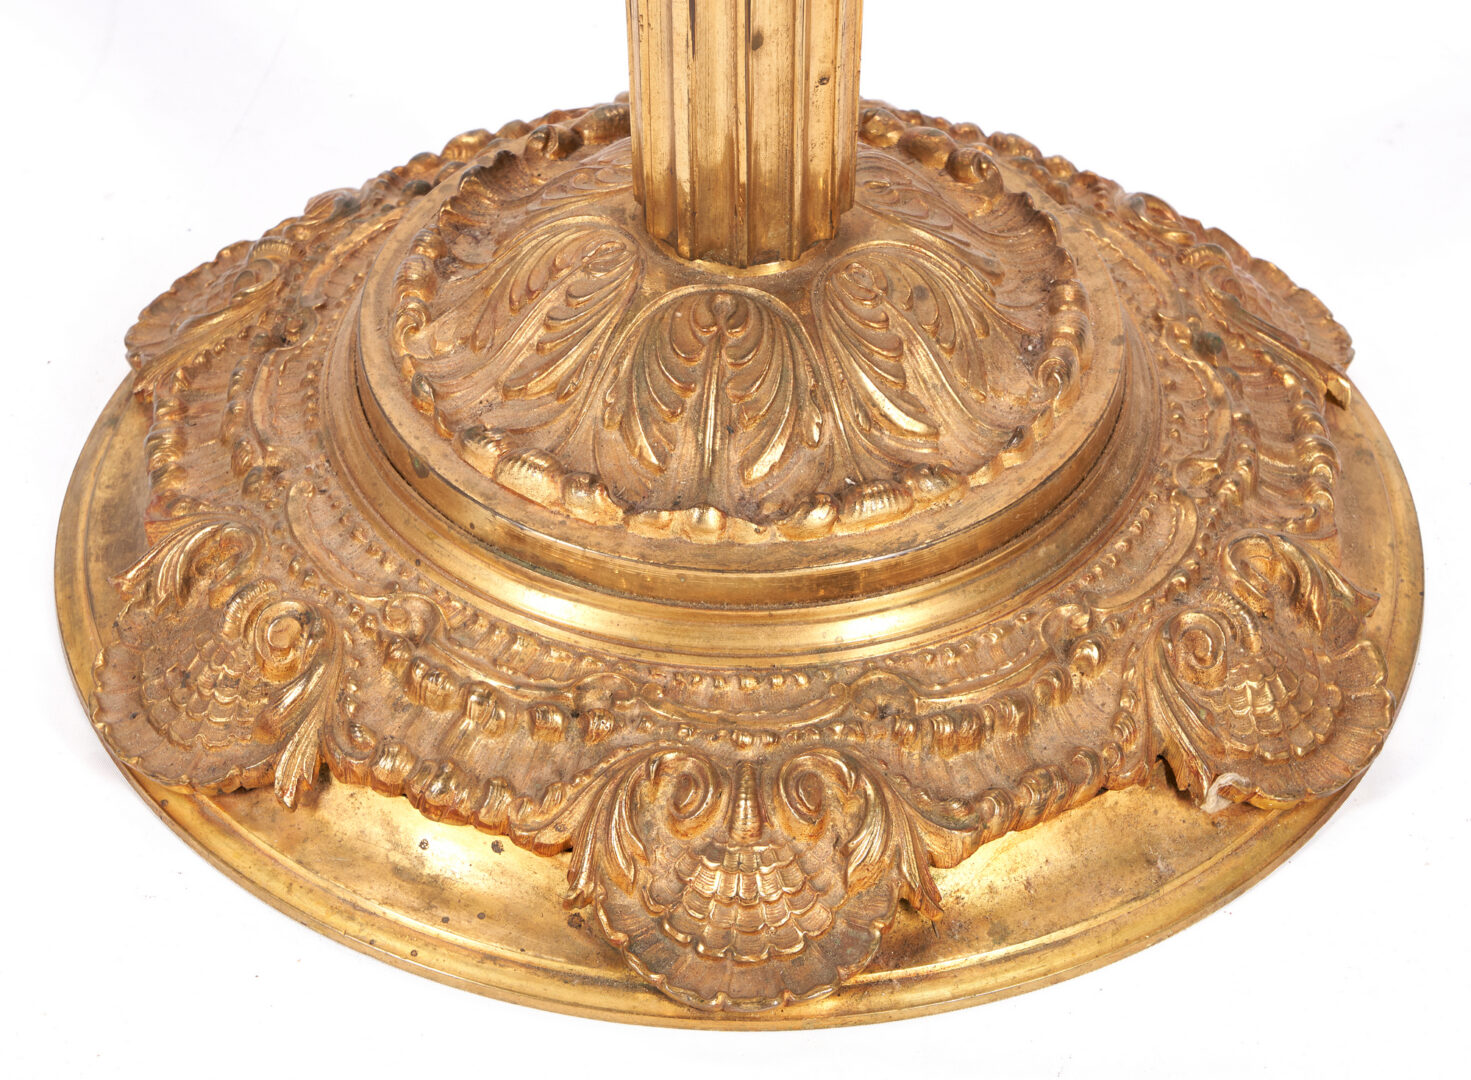 Lot 904: Neoclassical Style Gilt Pedestal